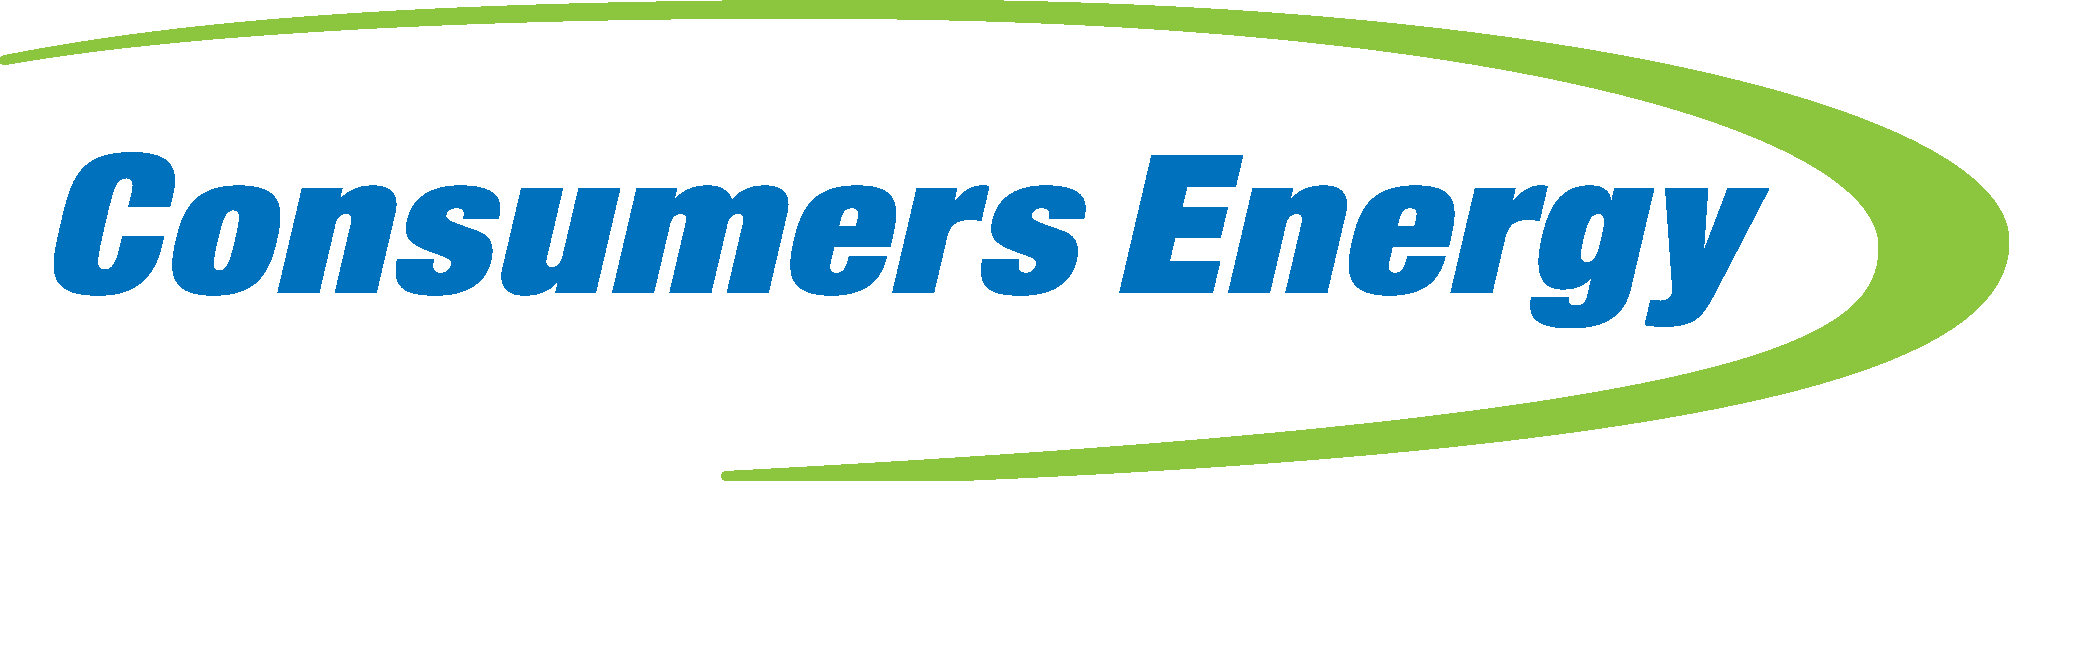 consumers-energy-logo.png